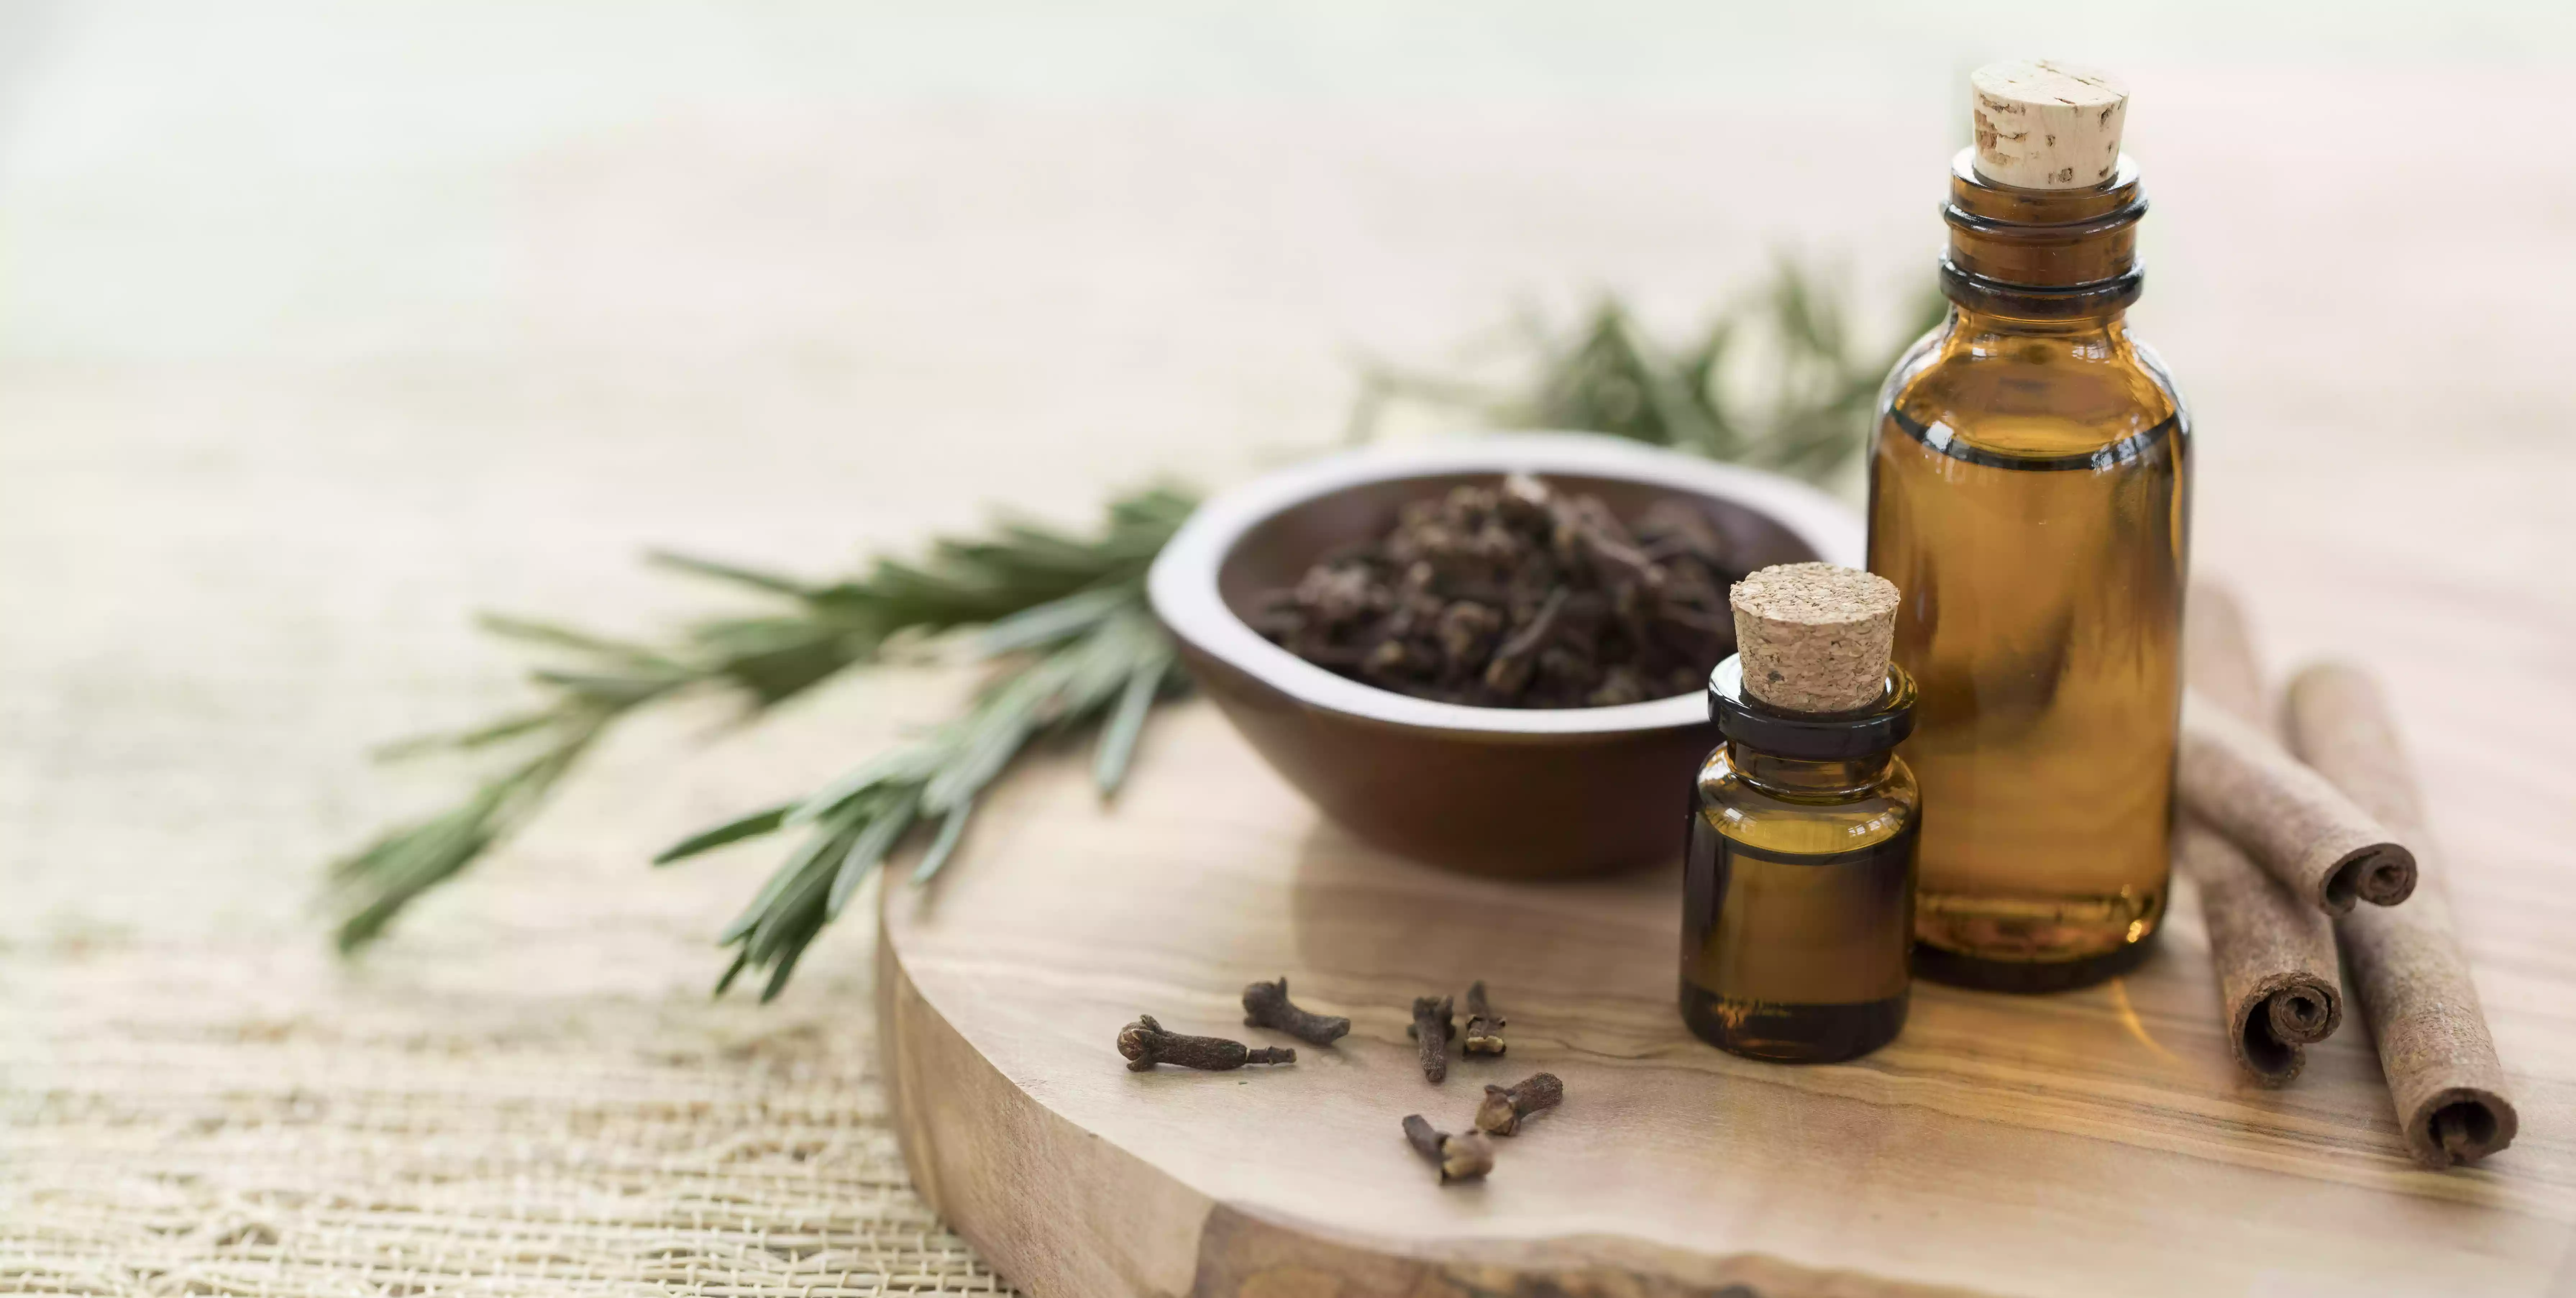 Essential Oils with Rosemary, Cloves & Cinnamon.